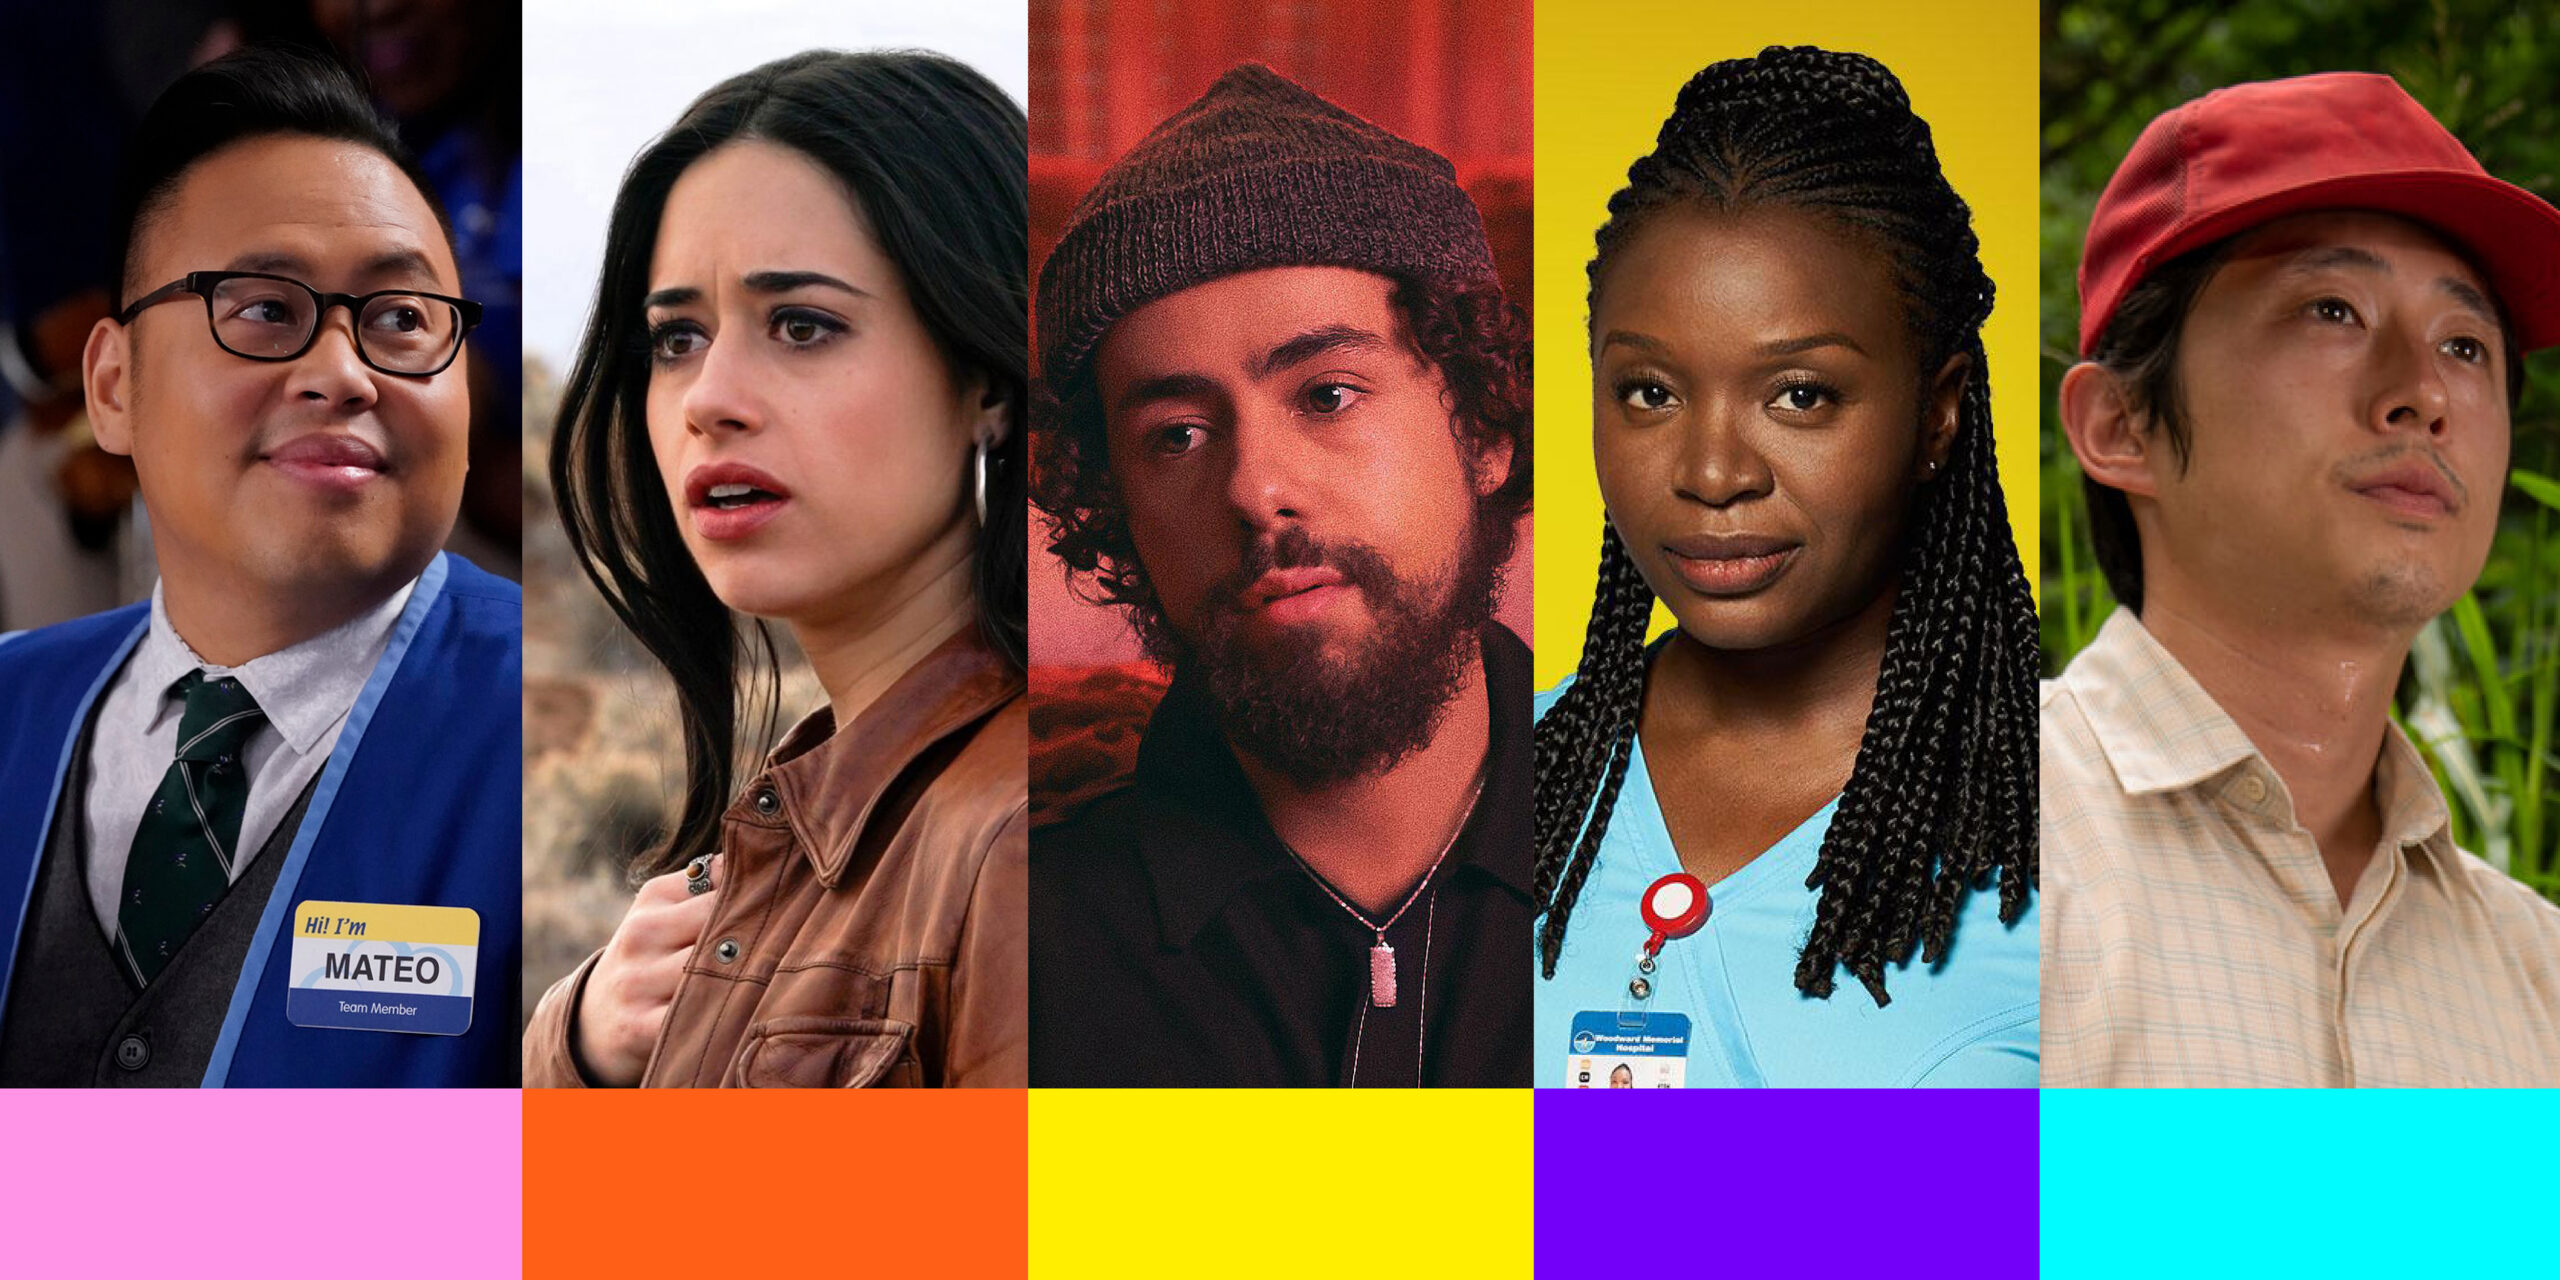 Five immigrant characters of different races from TV and film.